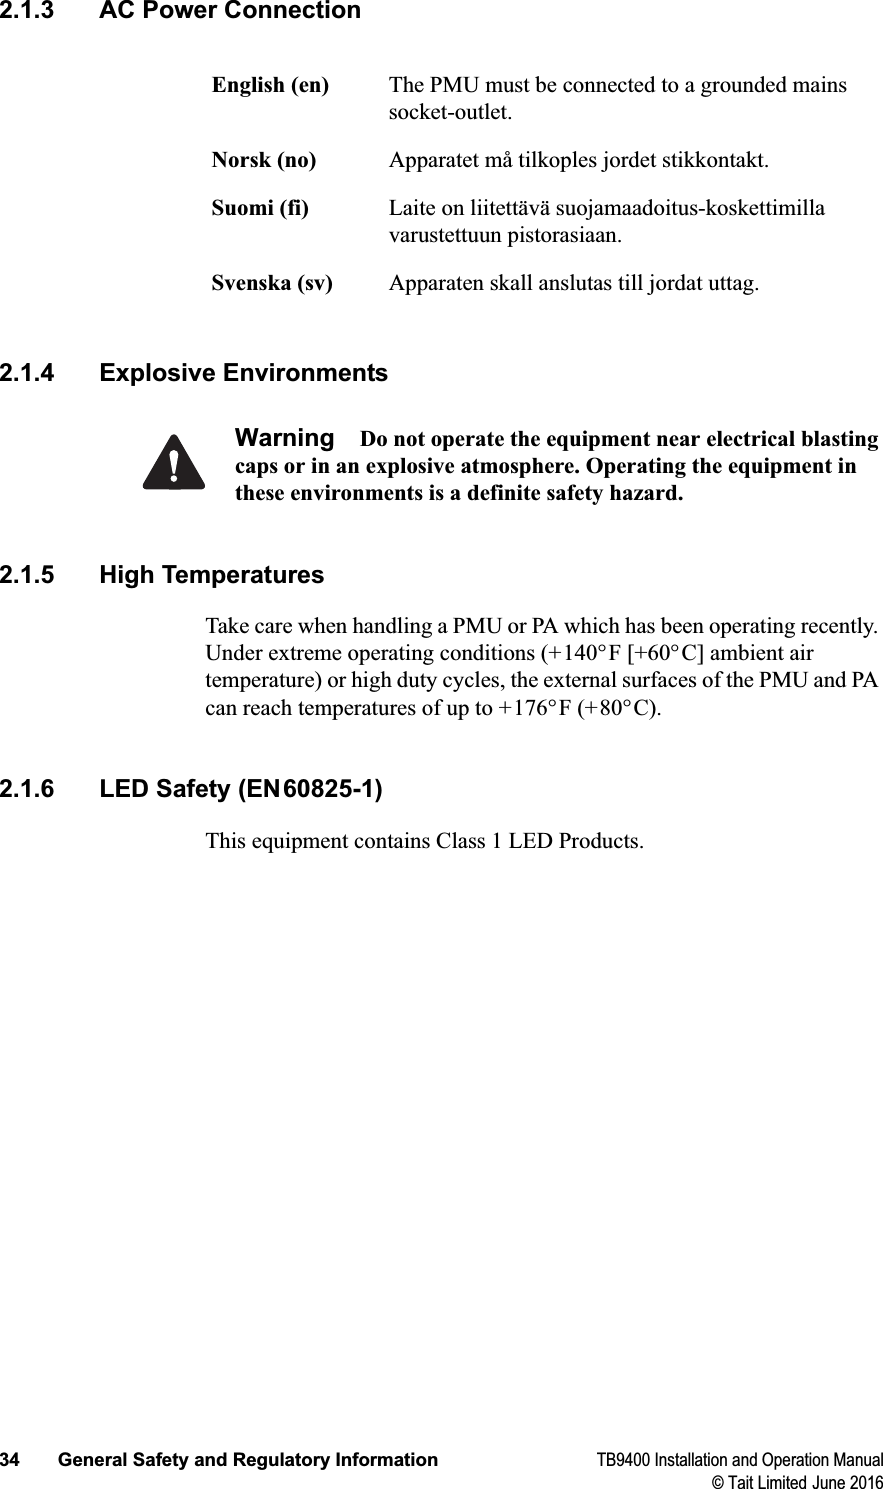 34 General Safety and Regulatory Information TB9400 Installation and Operation Manual© Tait Limited June 20162.1.3 AC Power Connection2.1.4 Explosive EnvironmentsWarning Do not operate the equipment near electrical blasting caps or in an explosive atmosphere. Operating the equipment in these environments is a definite safety hazard.2.1.5 High TemperaturesTake care when handling a PMU or PA which has been operating recently. Under extreme operating conditions (+140°F [+60°C] ambient air temperature) or high duty cycles, the external surfaces of the PMU and PA can reach temperatures of up to +176°F (+80°C).2.1.6 LED Safety (EN60825-1)This equipment contains Class 1 LED Products.English (en) The PMU must be connected to a grounded mains socket-outlet.Norsk (no) Apparatet må tilkoples jordet stikkontakt.Suomi (fi) Laite on liitettävä suojamaadoitus-koskettimillavarustettuun pistorasiaan.Svenska (sv) Apparaten skall anslutas till jordat uttag.